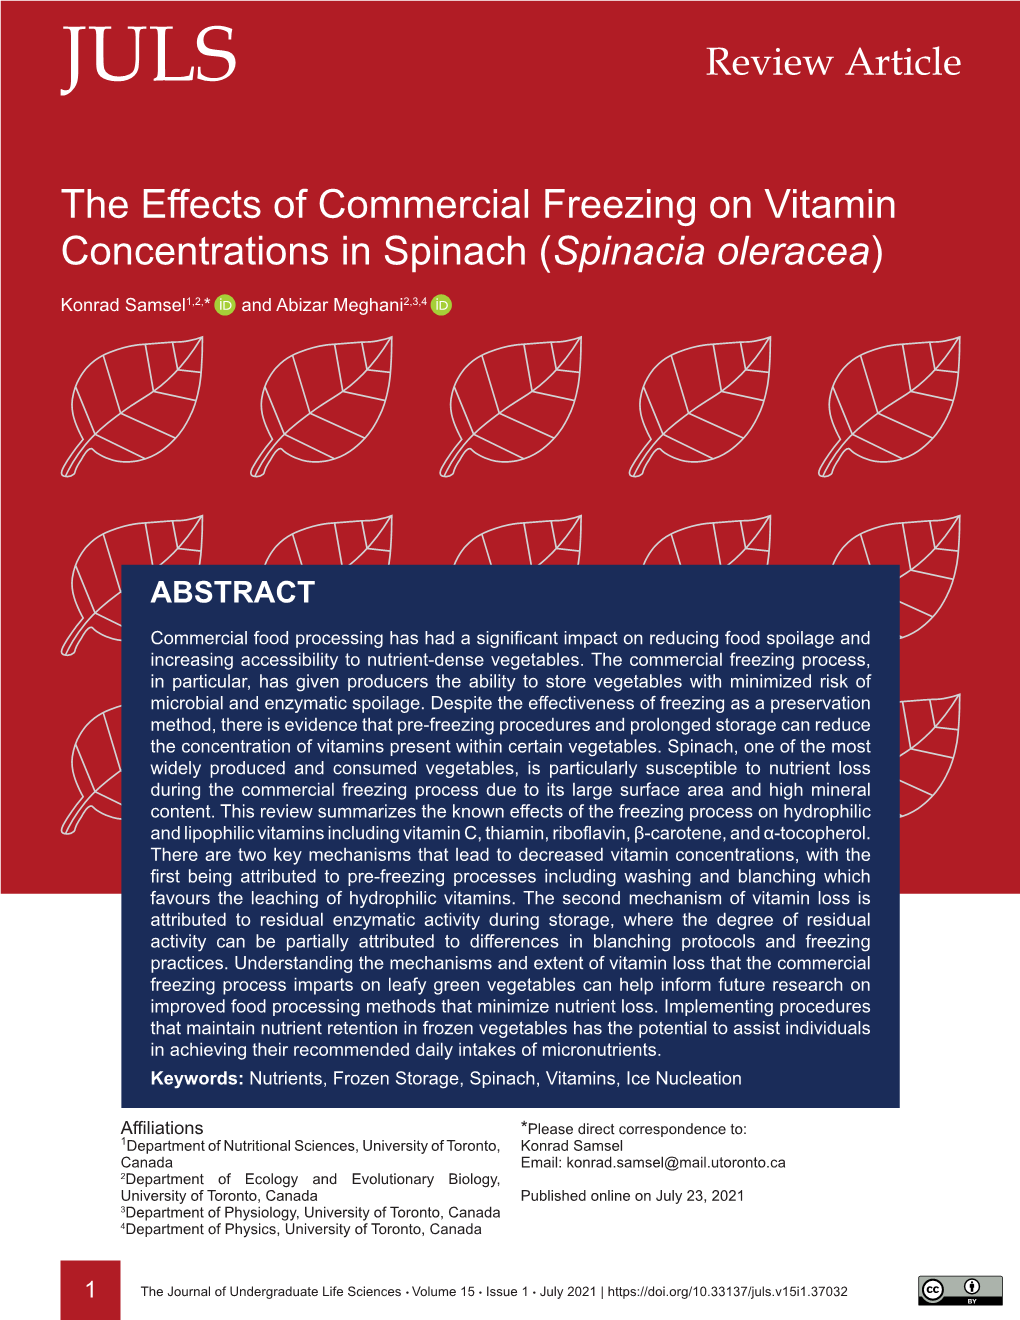 The Effects of Commercial Freezing on Vitamin Concentrations in Spinach (Spinacia Oleracea)